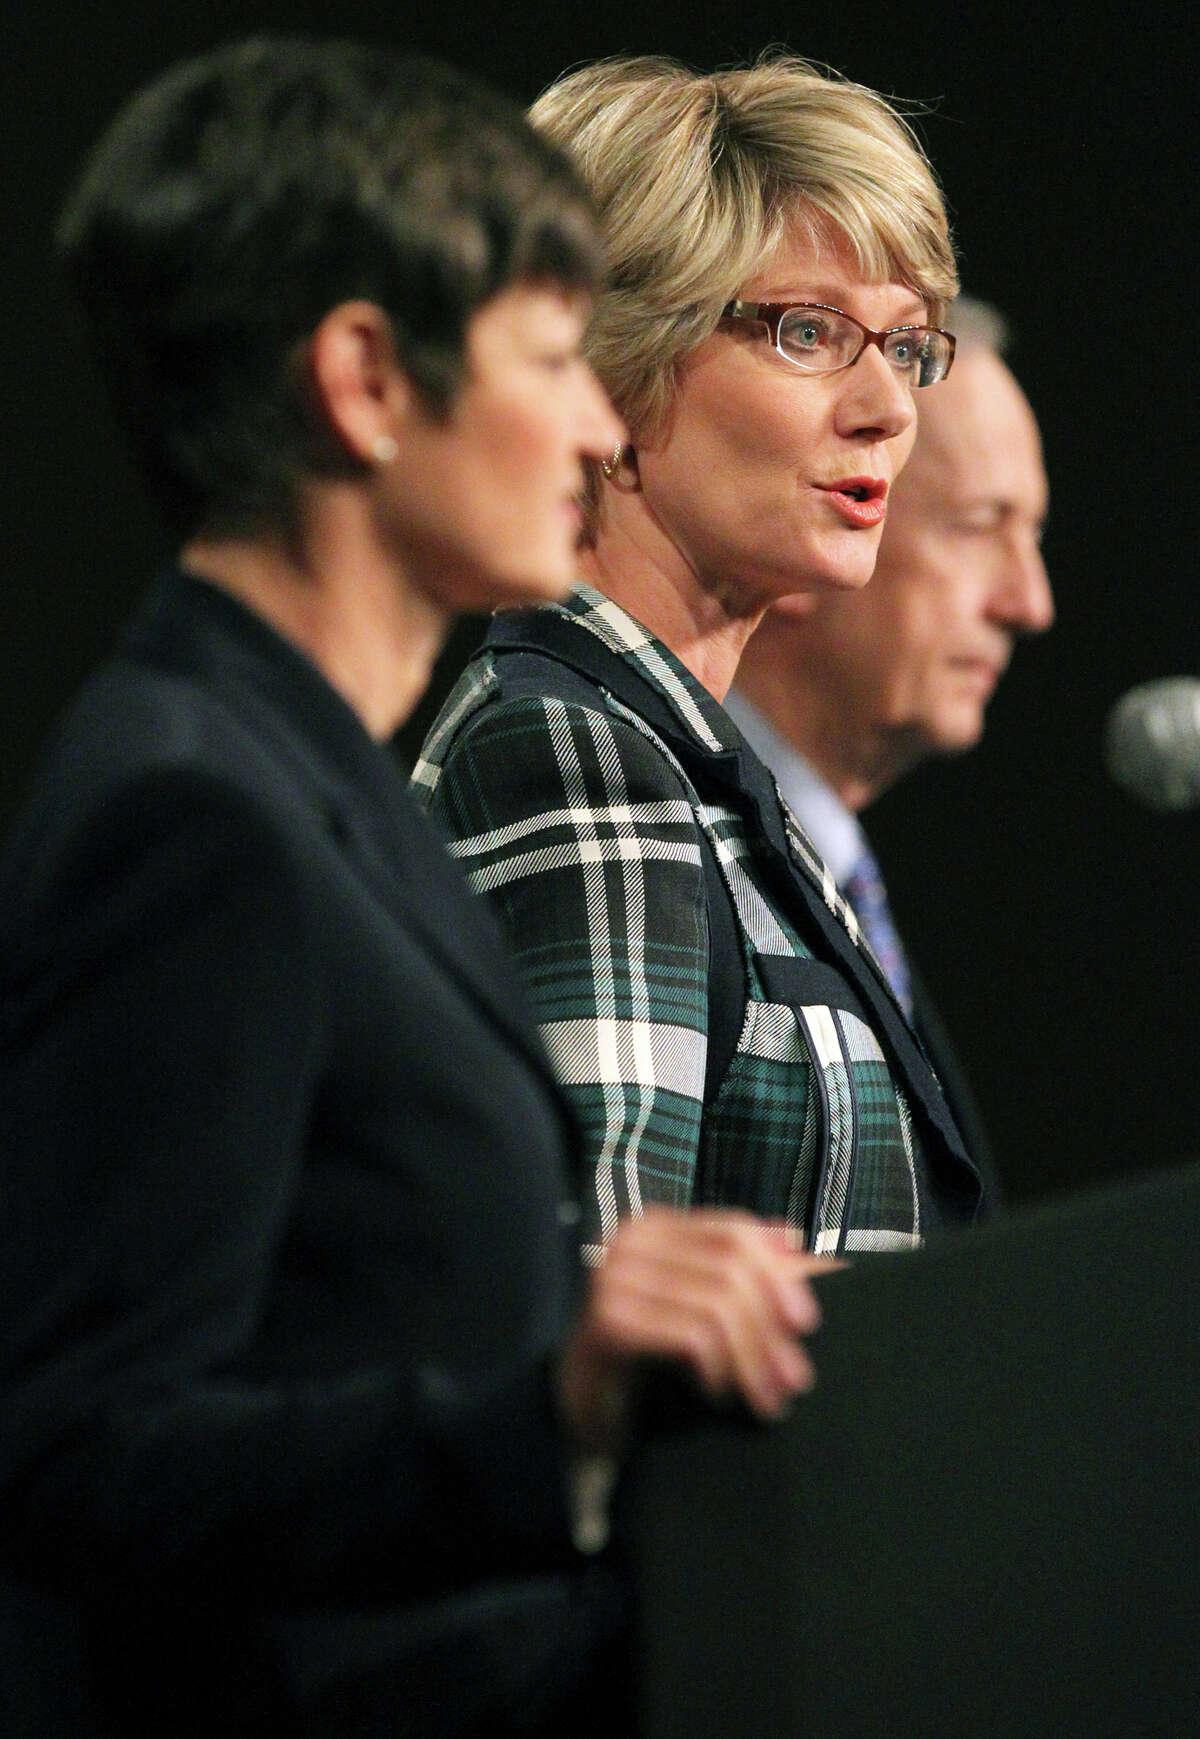 In this Wednesday, Feb. 8, 2012, photo, Texas Senate District 25 candidate Elizabeth Ames Jones, Chairman of the Texas Railroad Commission, center, speaks during a debate held by The Greater San Antonio Chamber of Commerce at the Pearl Stable, in San Antonio, Texas. On the left is candidate Dr. Donna Campbell, and on the right is incumbent Senator Jeff Wentworth. On April 21, 2012, at the state Capitol, Texas senators talked about being friends with their colleagues and stick to polite decorum during even the most contentious of debates. (AP Photo/The San Antonio Express-News, John Davenport) RUMBO DE SAN ANTONIO OUT;